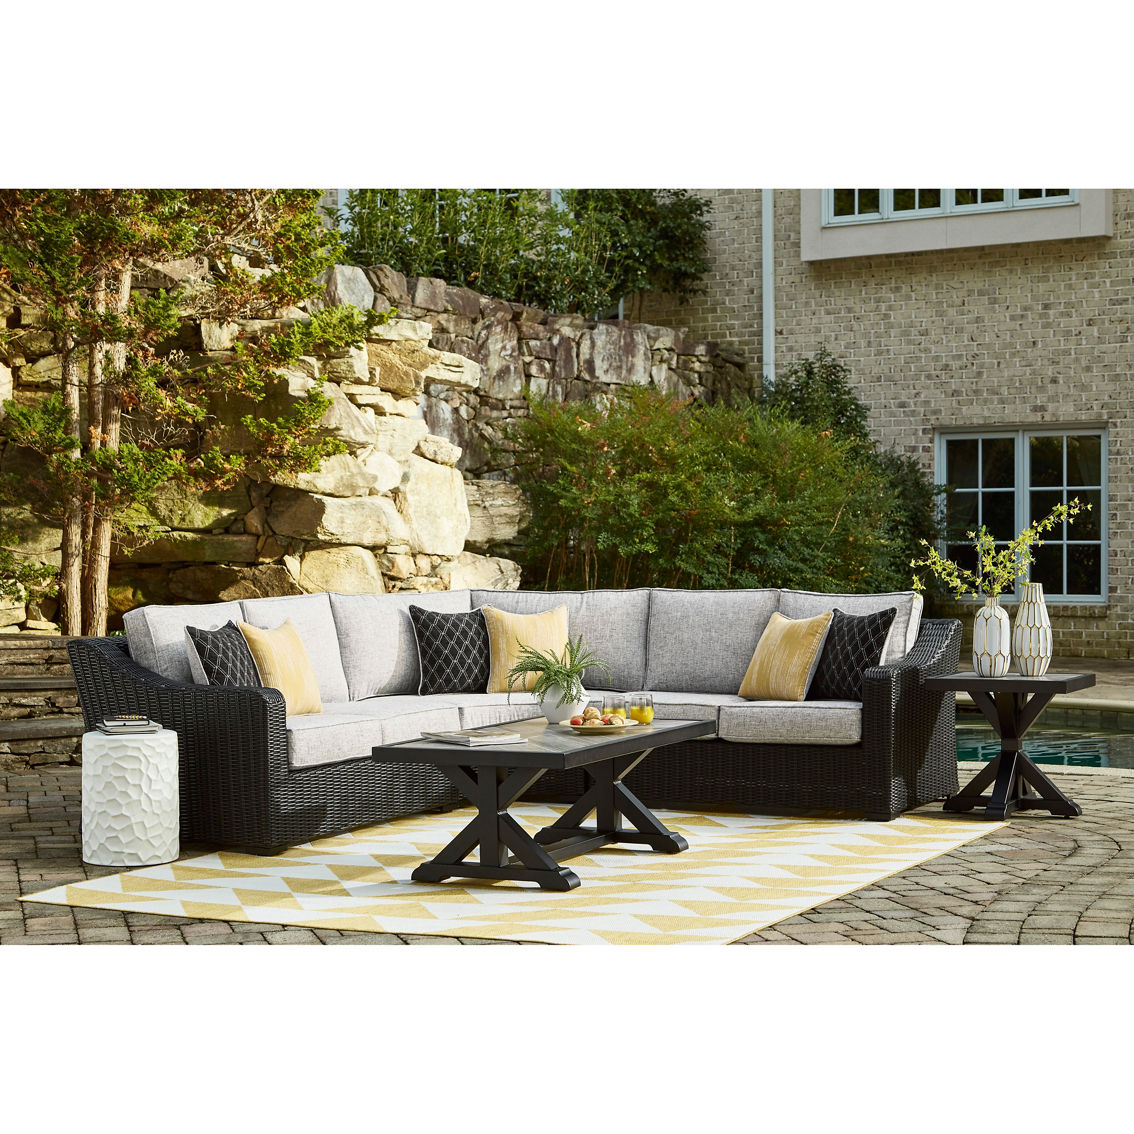 Signature Design by Ashley Beachcroft 2 pc. Outdoor Loveseat - Image 2 of 2